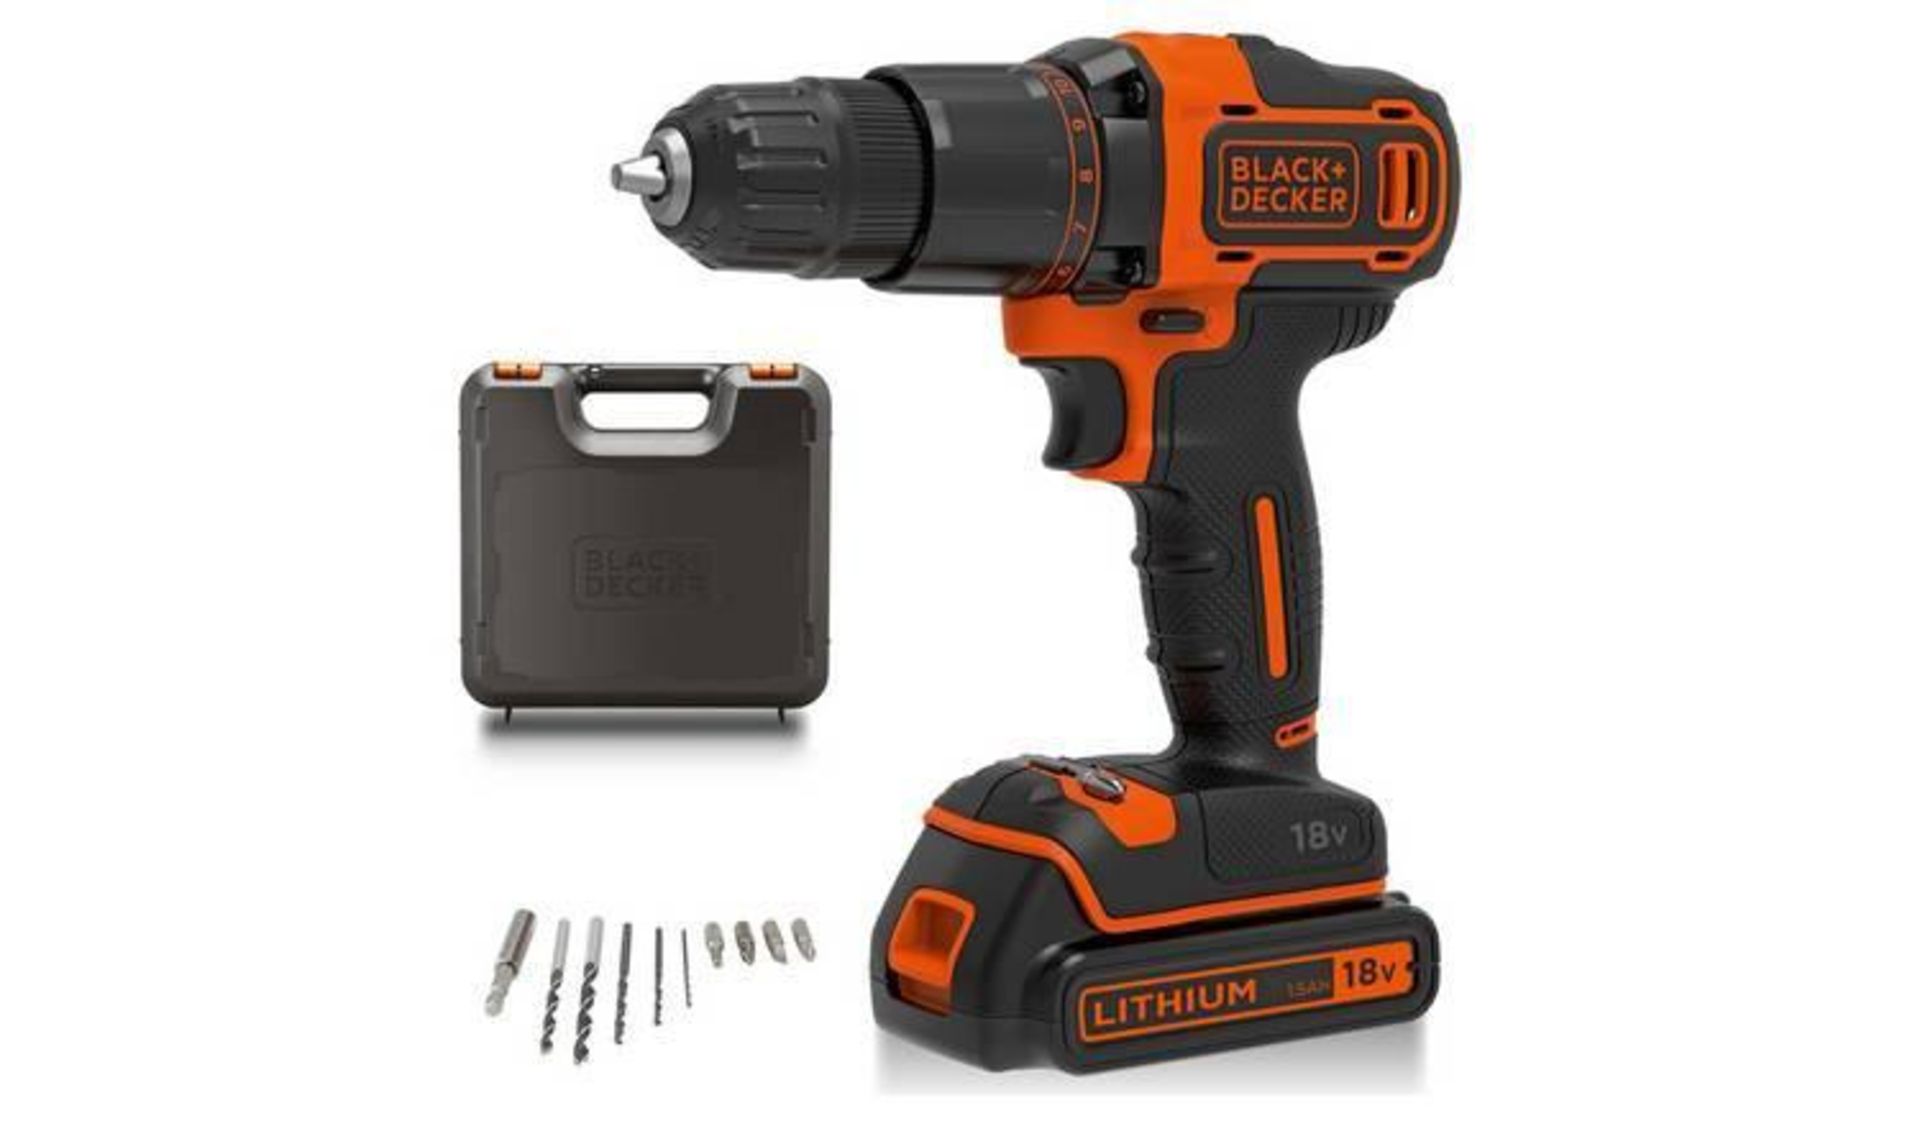 Black + Decker Cordless Hammer Drill with Battery - 18V 826/0385 £50.00 RRP